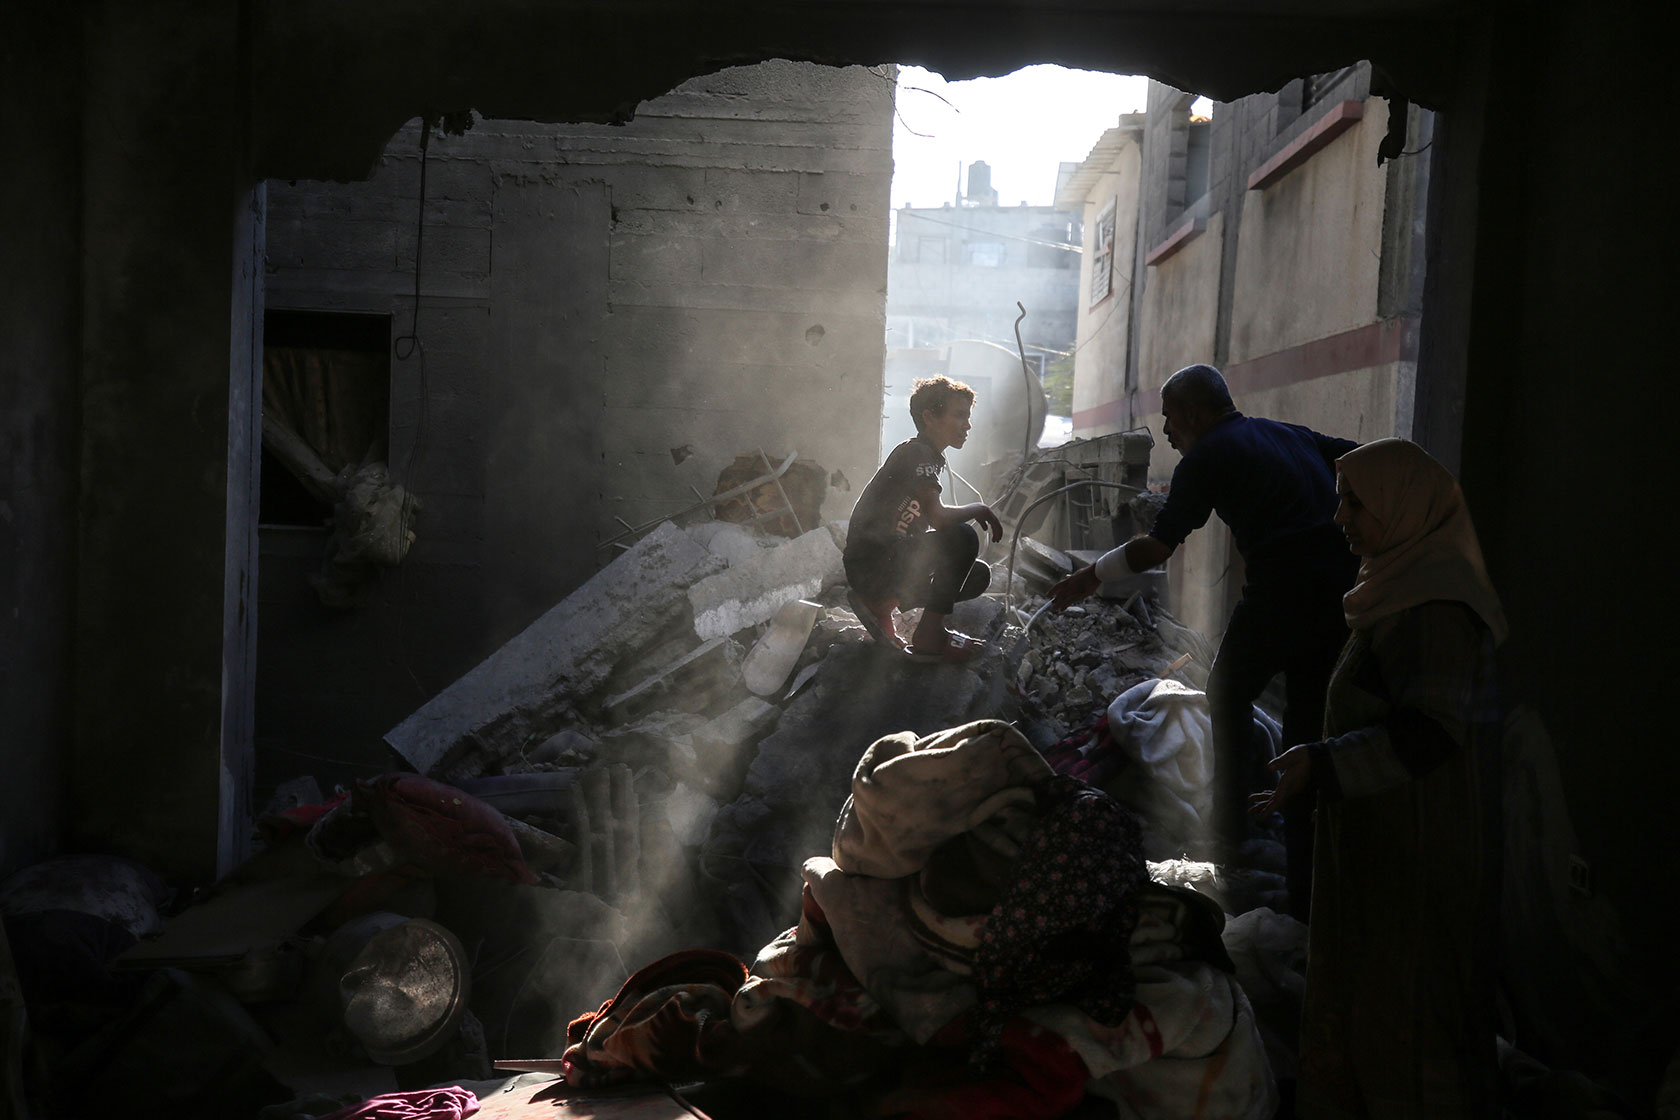 Photo shows a father reaching for his young child sitting on top of rubble in the destroyed home, with an opening in the wall letting in a stream of sunlight